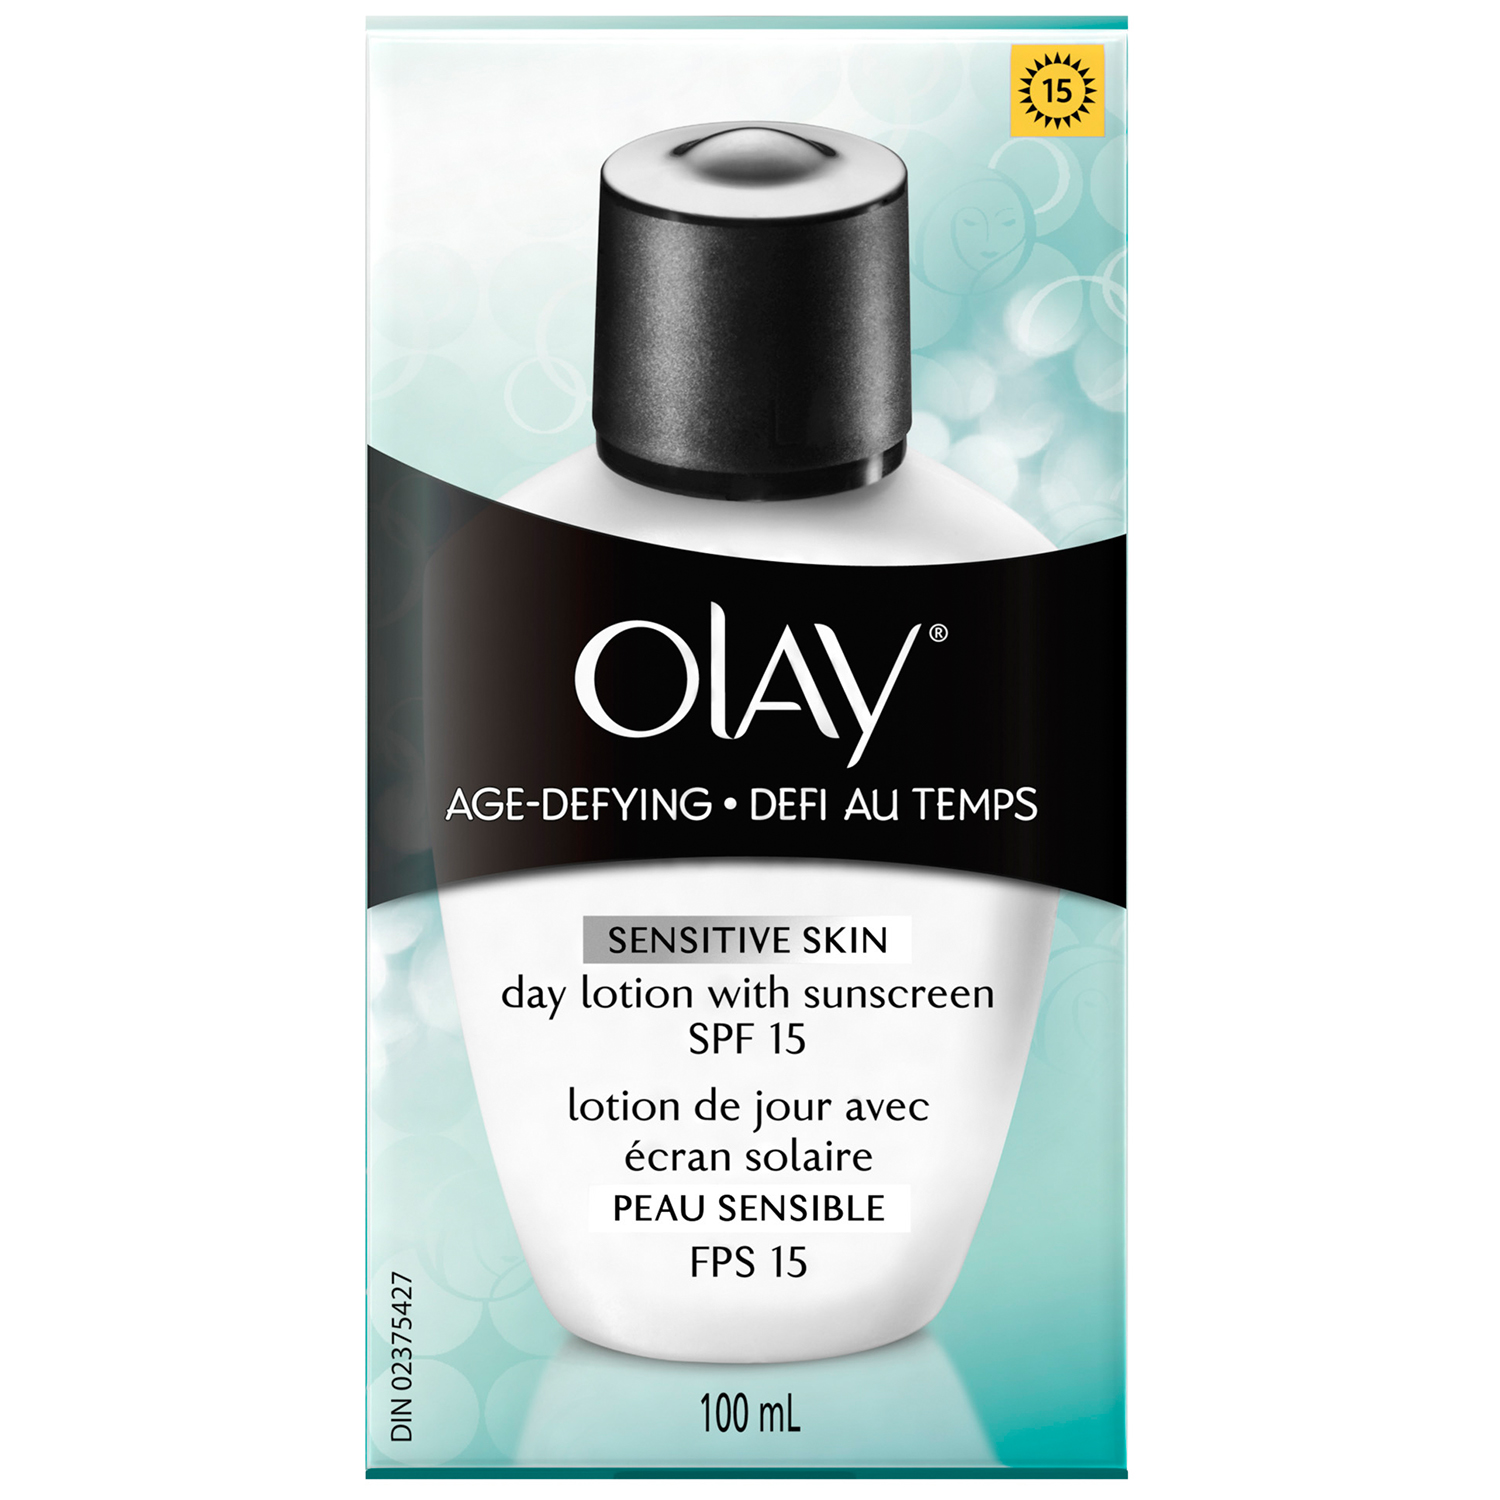 Olay Age Defying Spf 15 Sensitive Skin Day Lotion With Sunscreen Broad Spectrum 3.4 fl oz